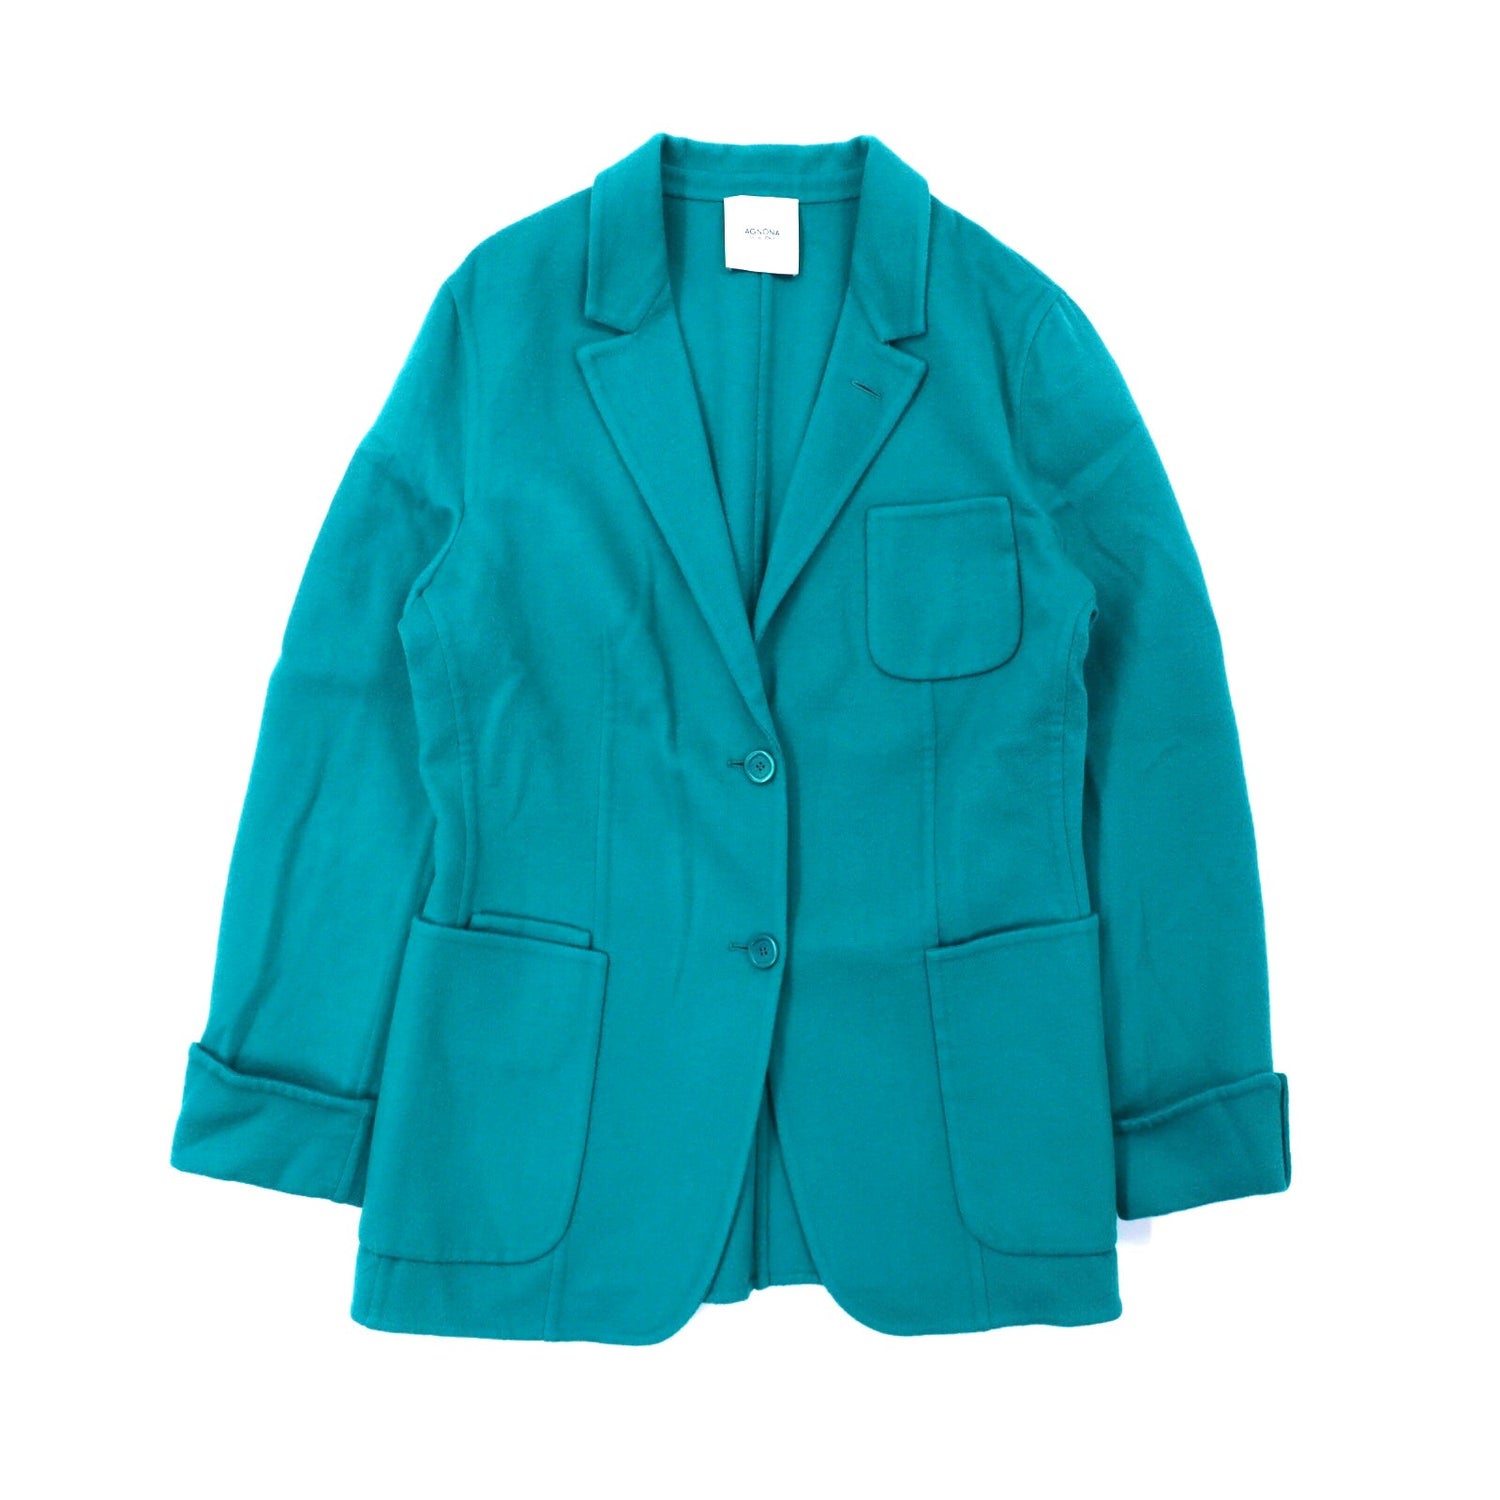 Agnona Tailored Jacket 44 Green Cashmere Made in Italy – 日本然リトテ